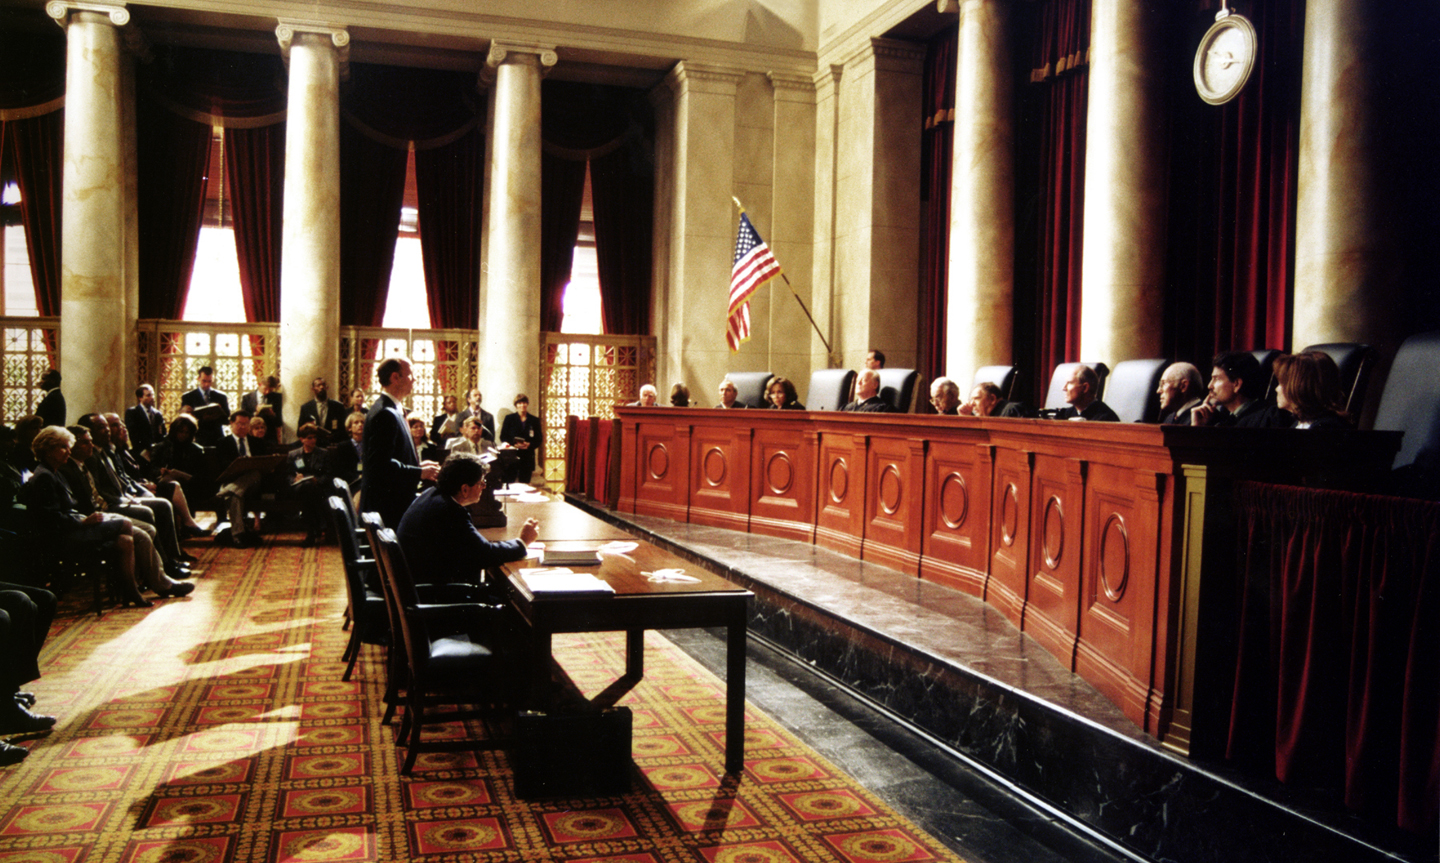 The Court - Supreme Court room built at Raleigh Studios